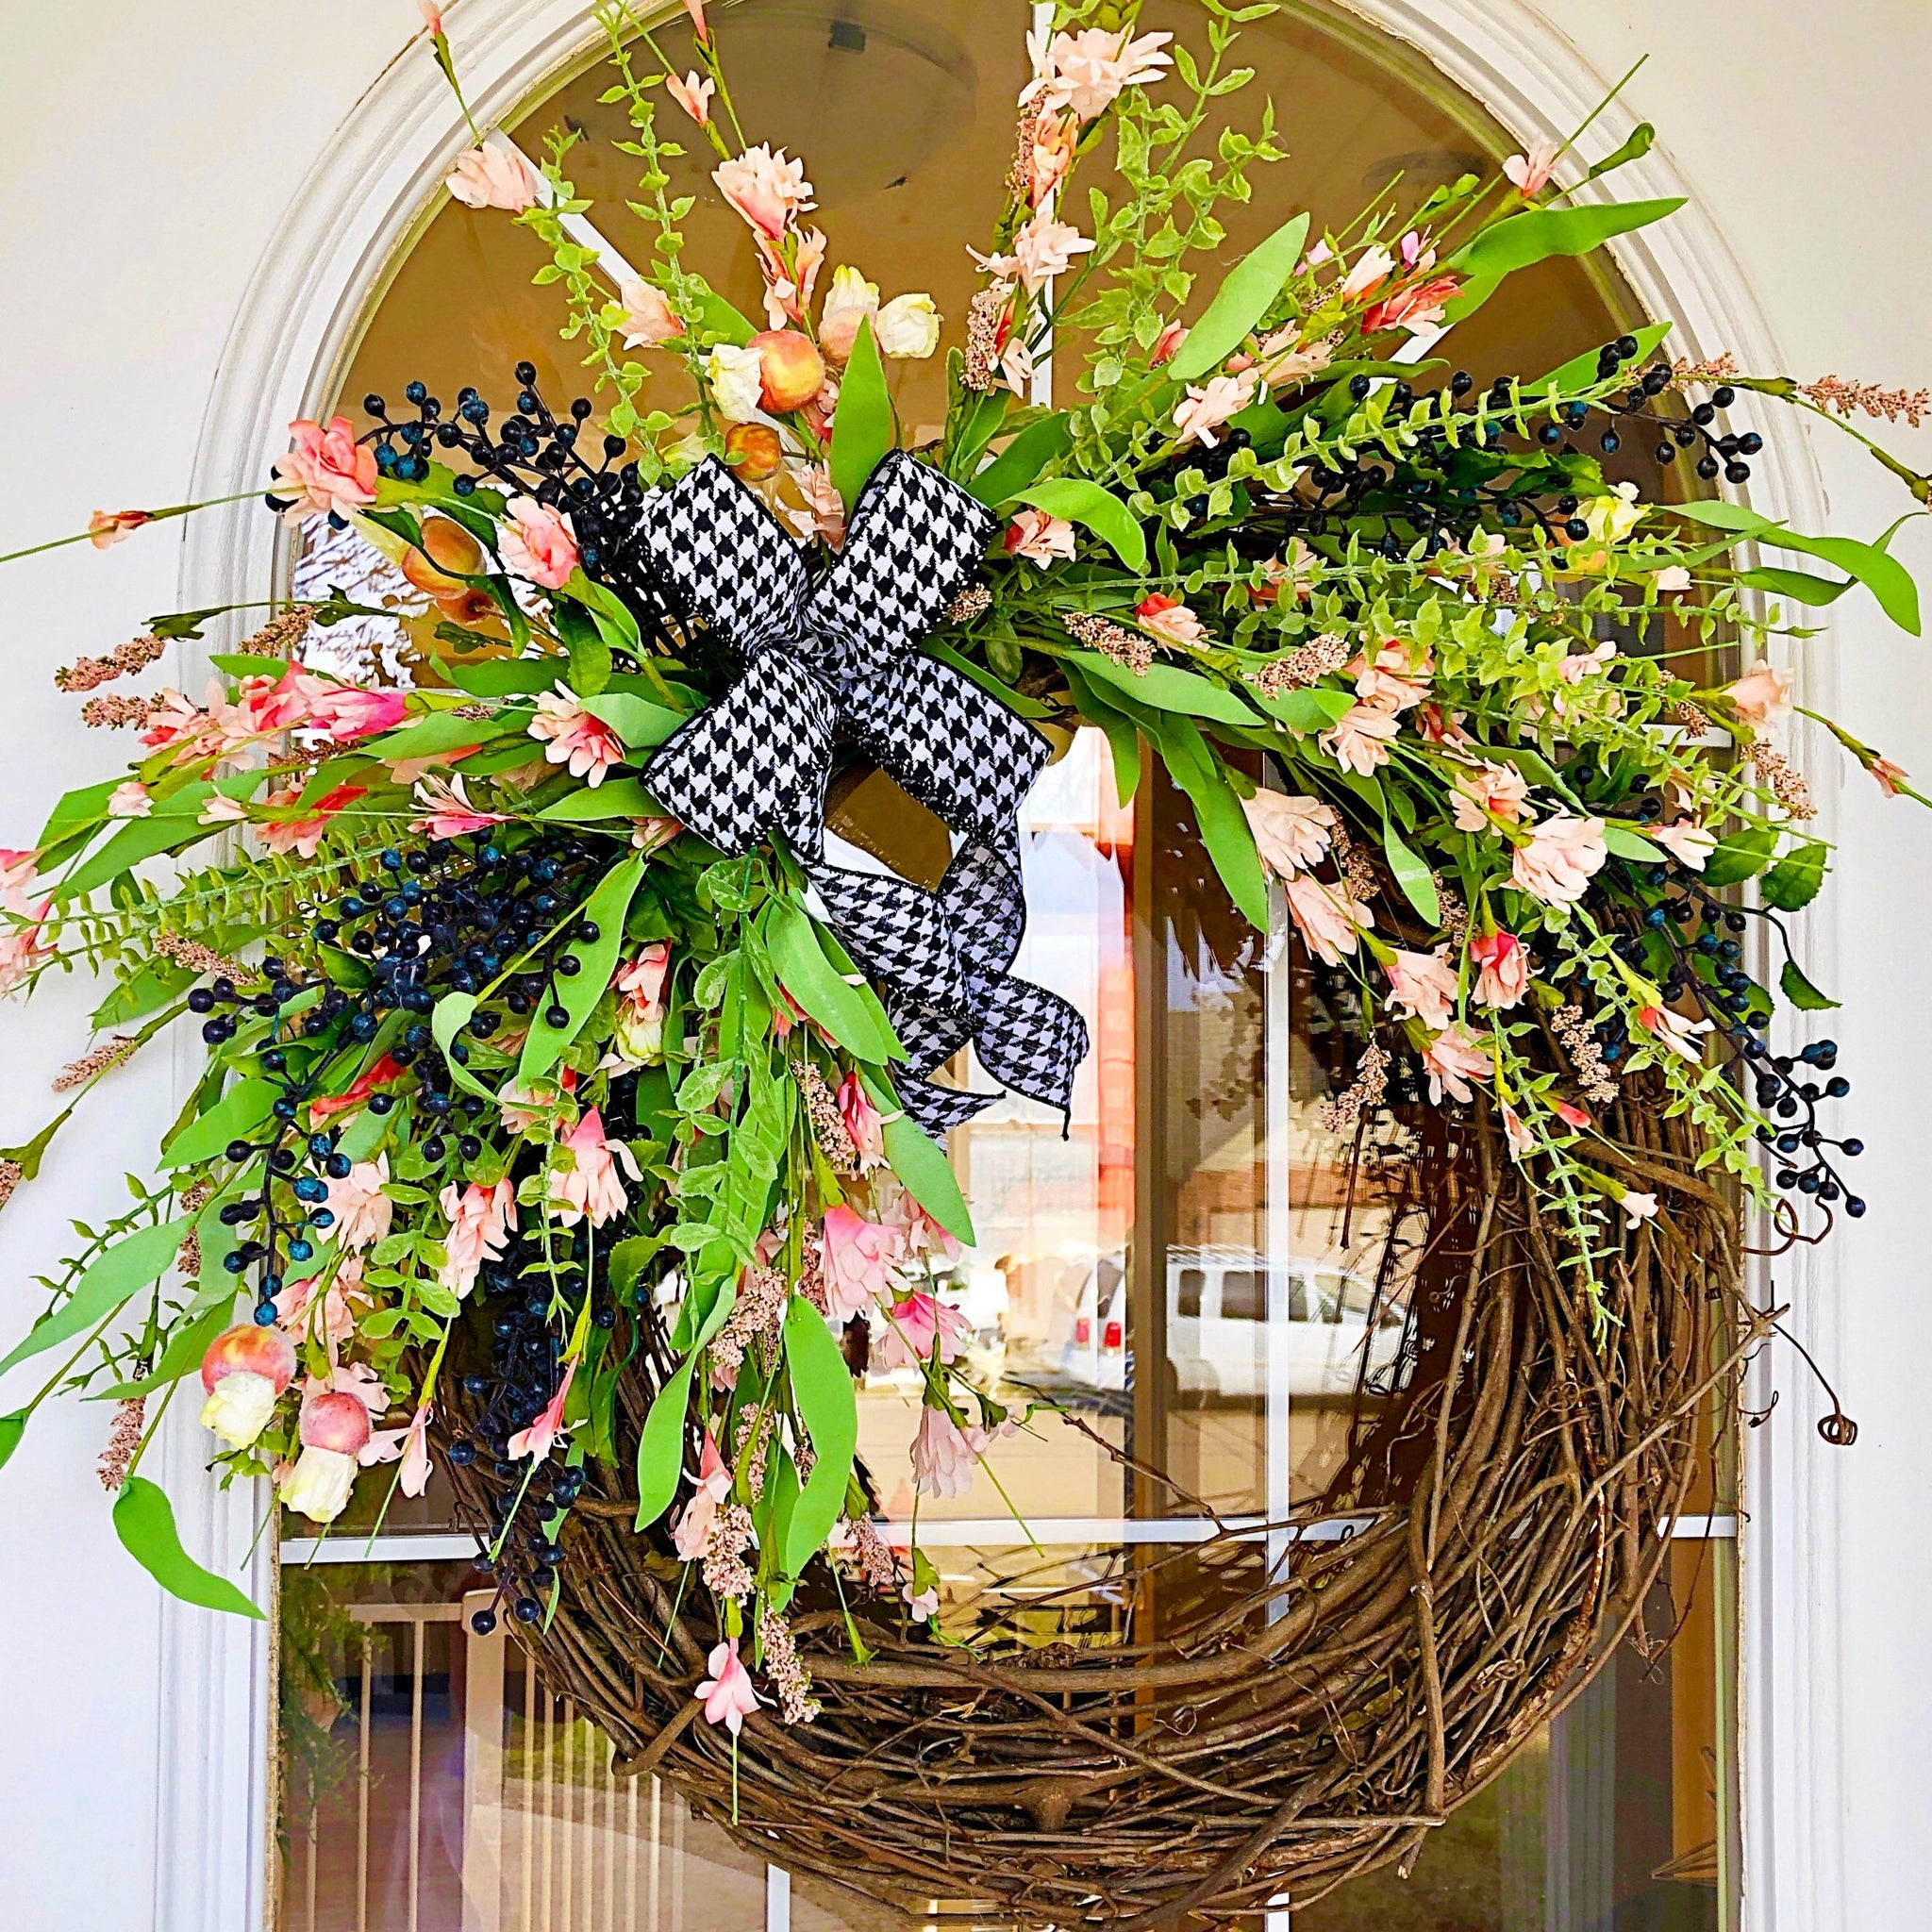 Everyday Spring Wreath Pink Blossoms & Berries with Houndstooth Ribbon –  Brownbottle Burlap